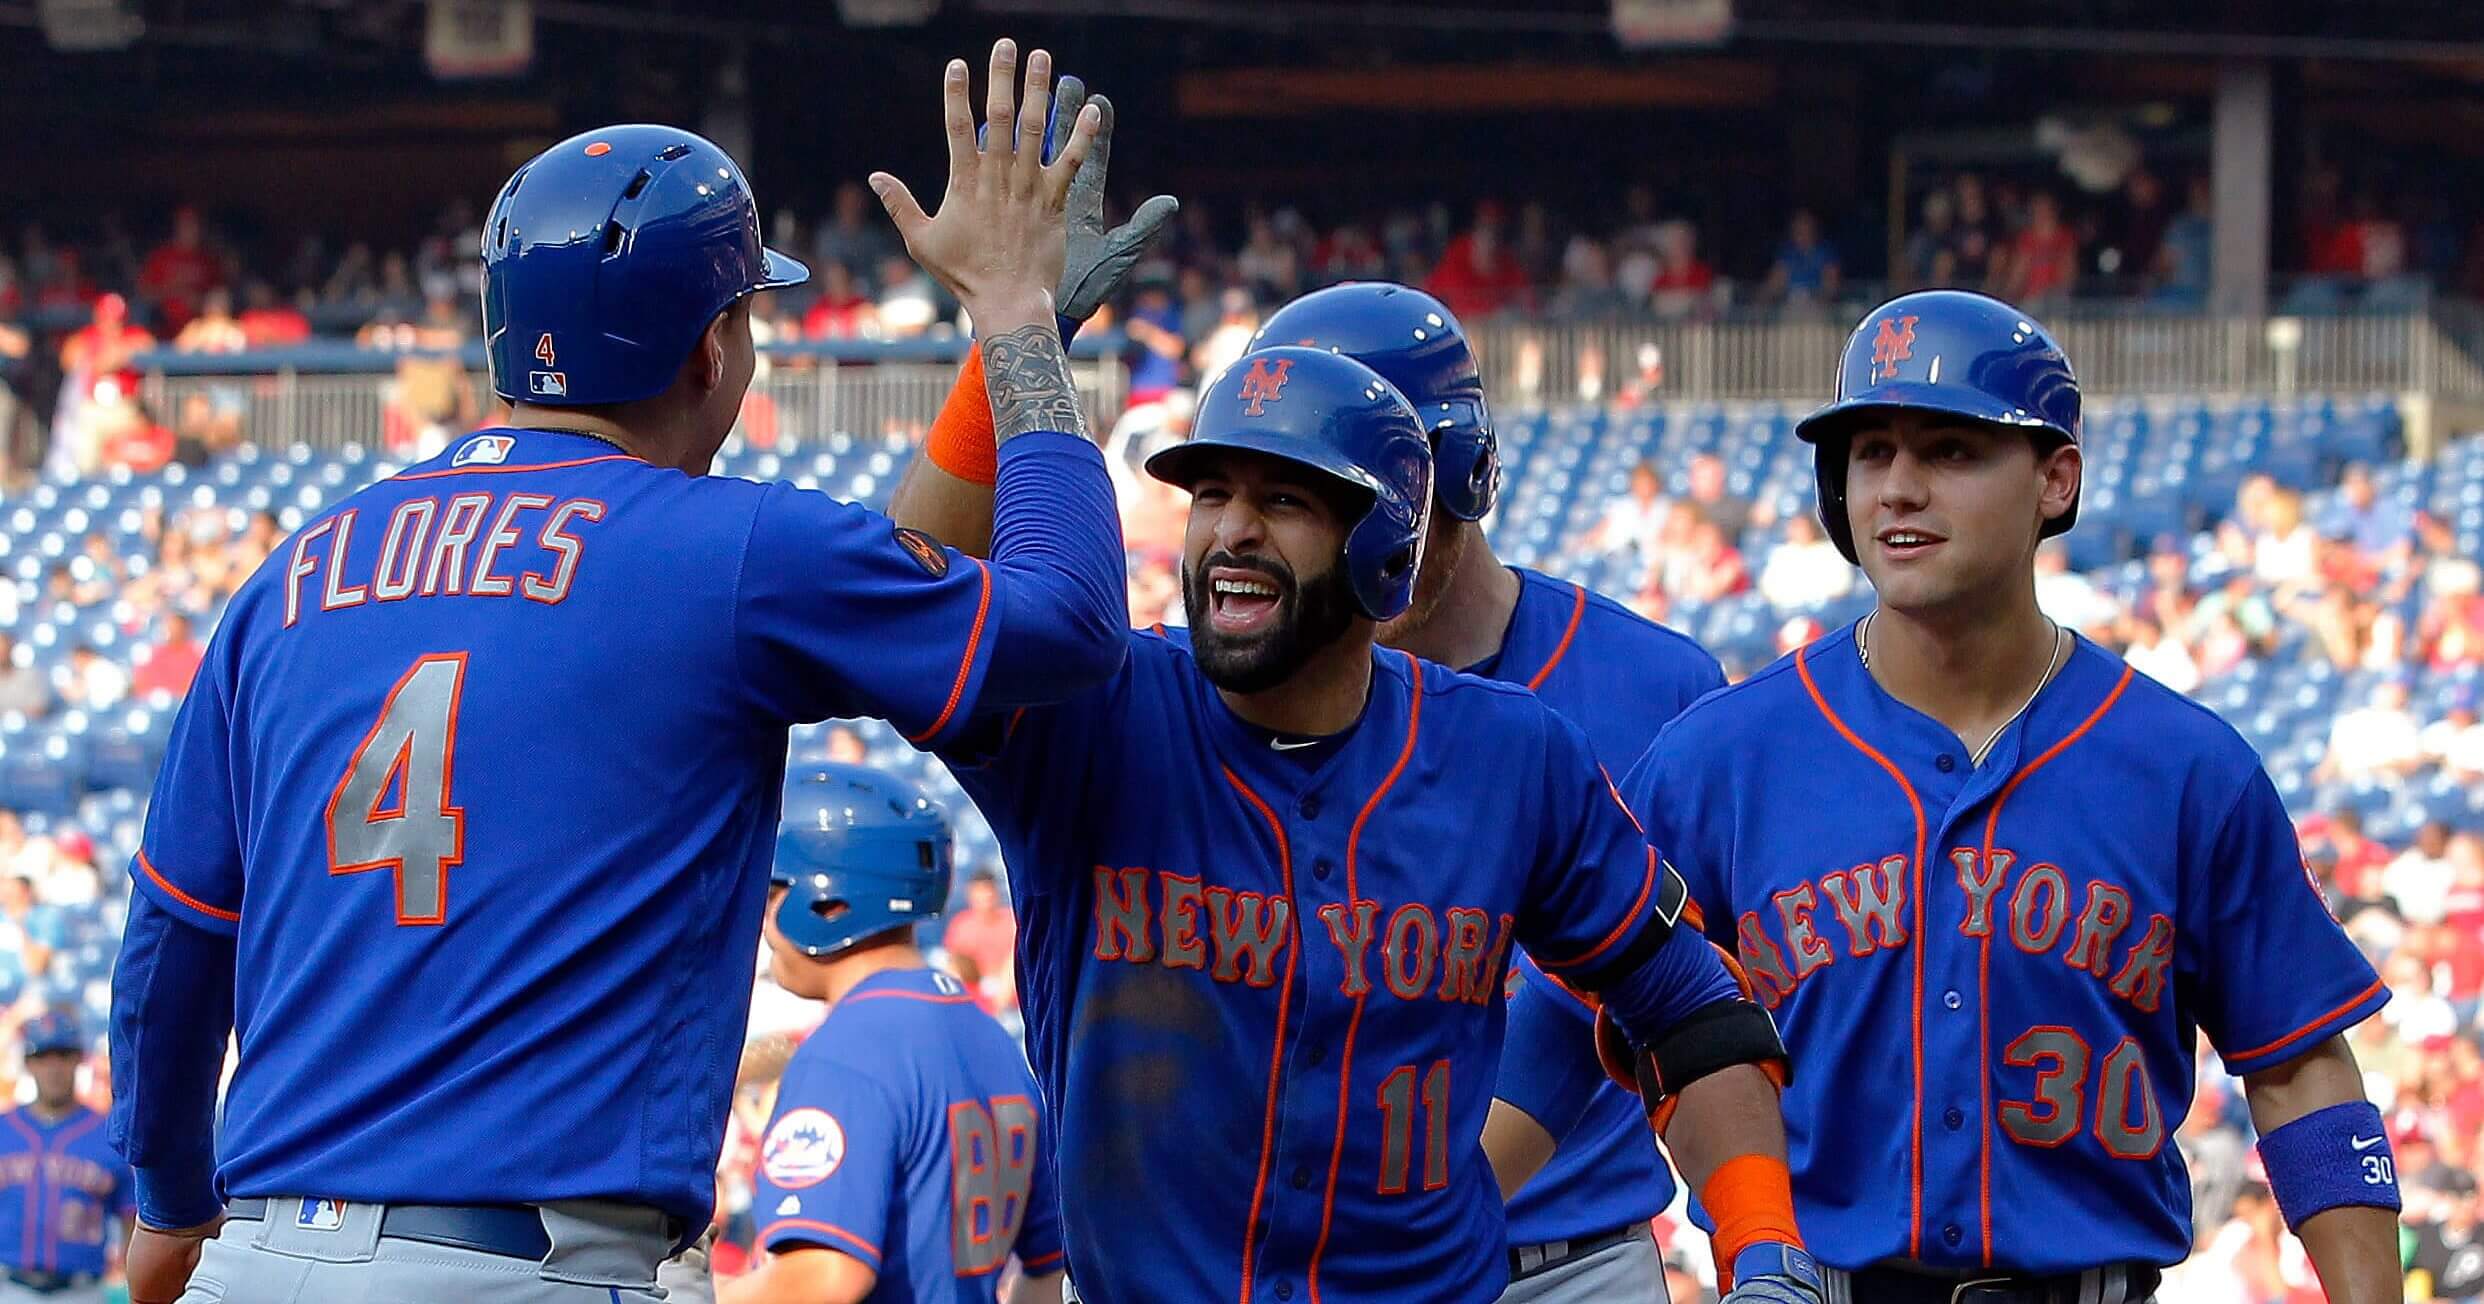 New York Mets' Jose Bautista, center, high-fives Wilmer Flores after Bautista hit a grand slam during the fifth inning of a baseball game against the Philadelphia Phillies on Thursday in Philadelphia.